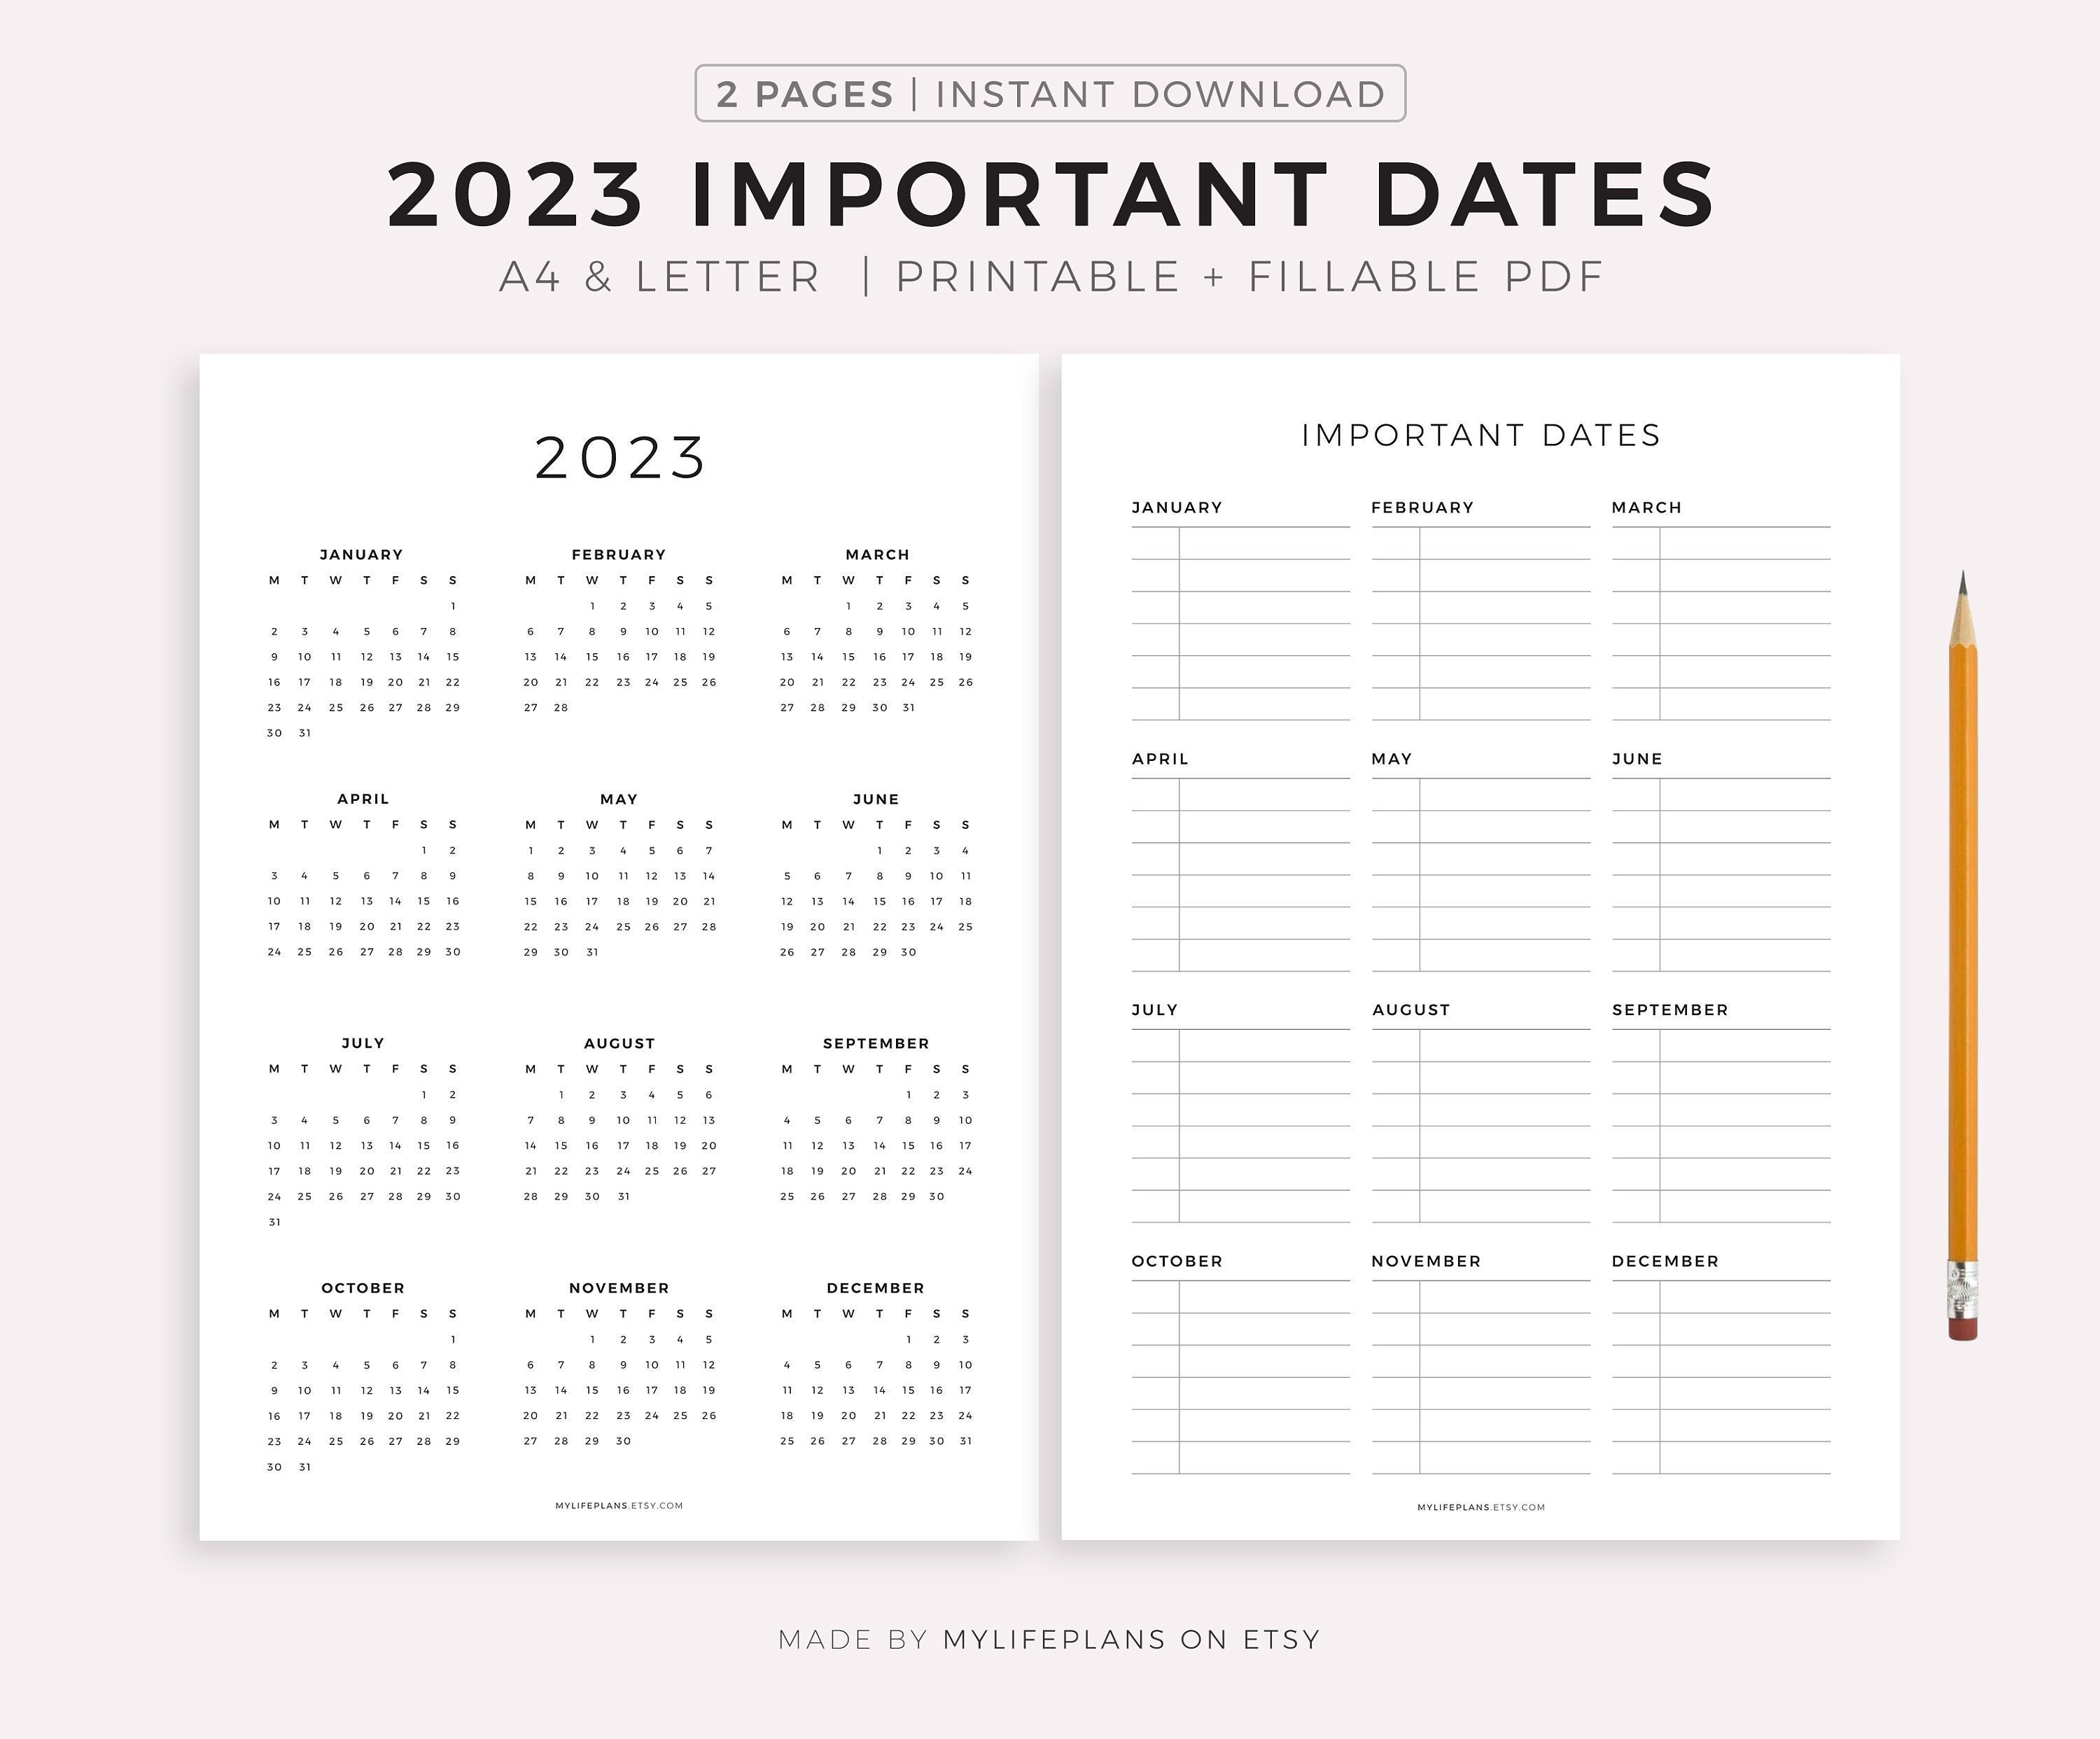 2023-calendar-and-important-dates-page-printable-birthdays-etsy-finland